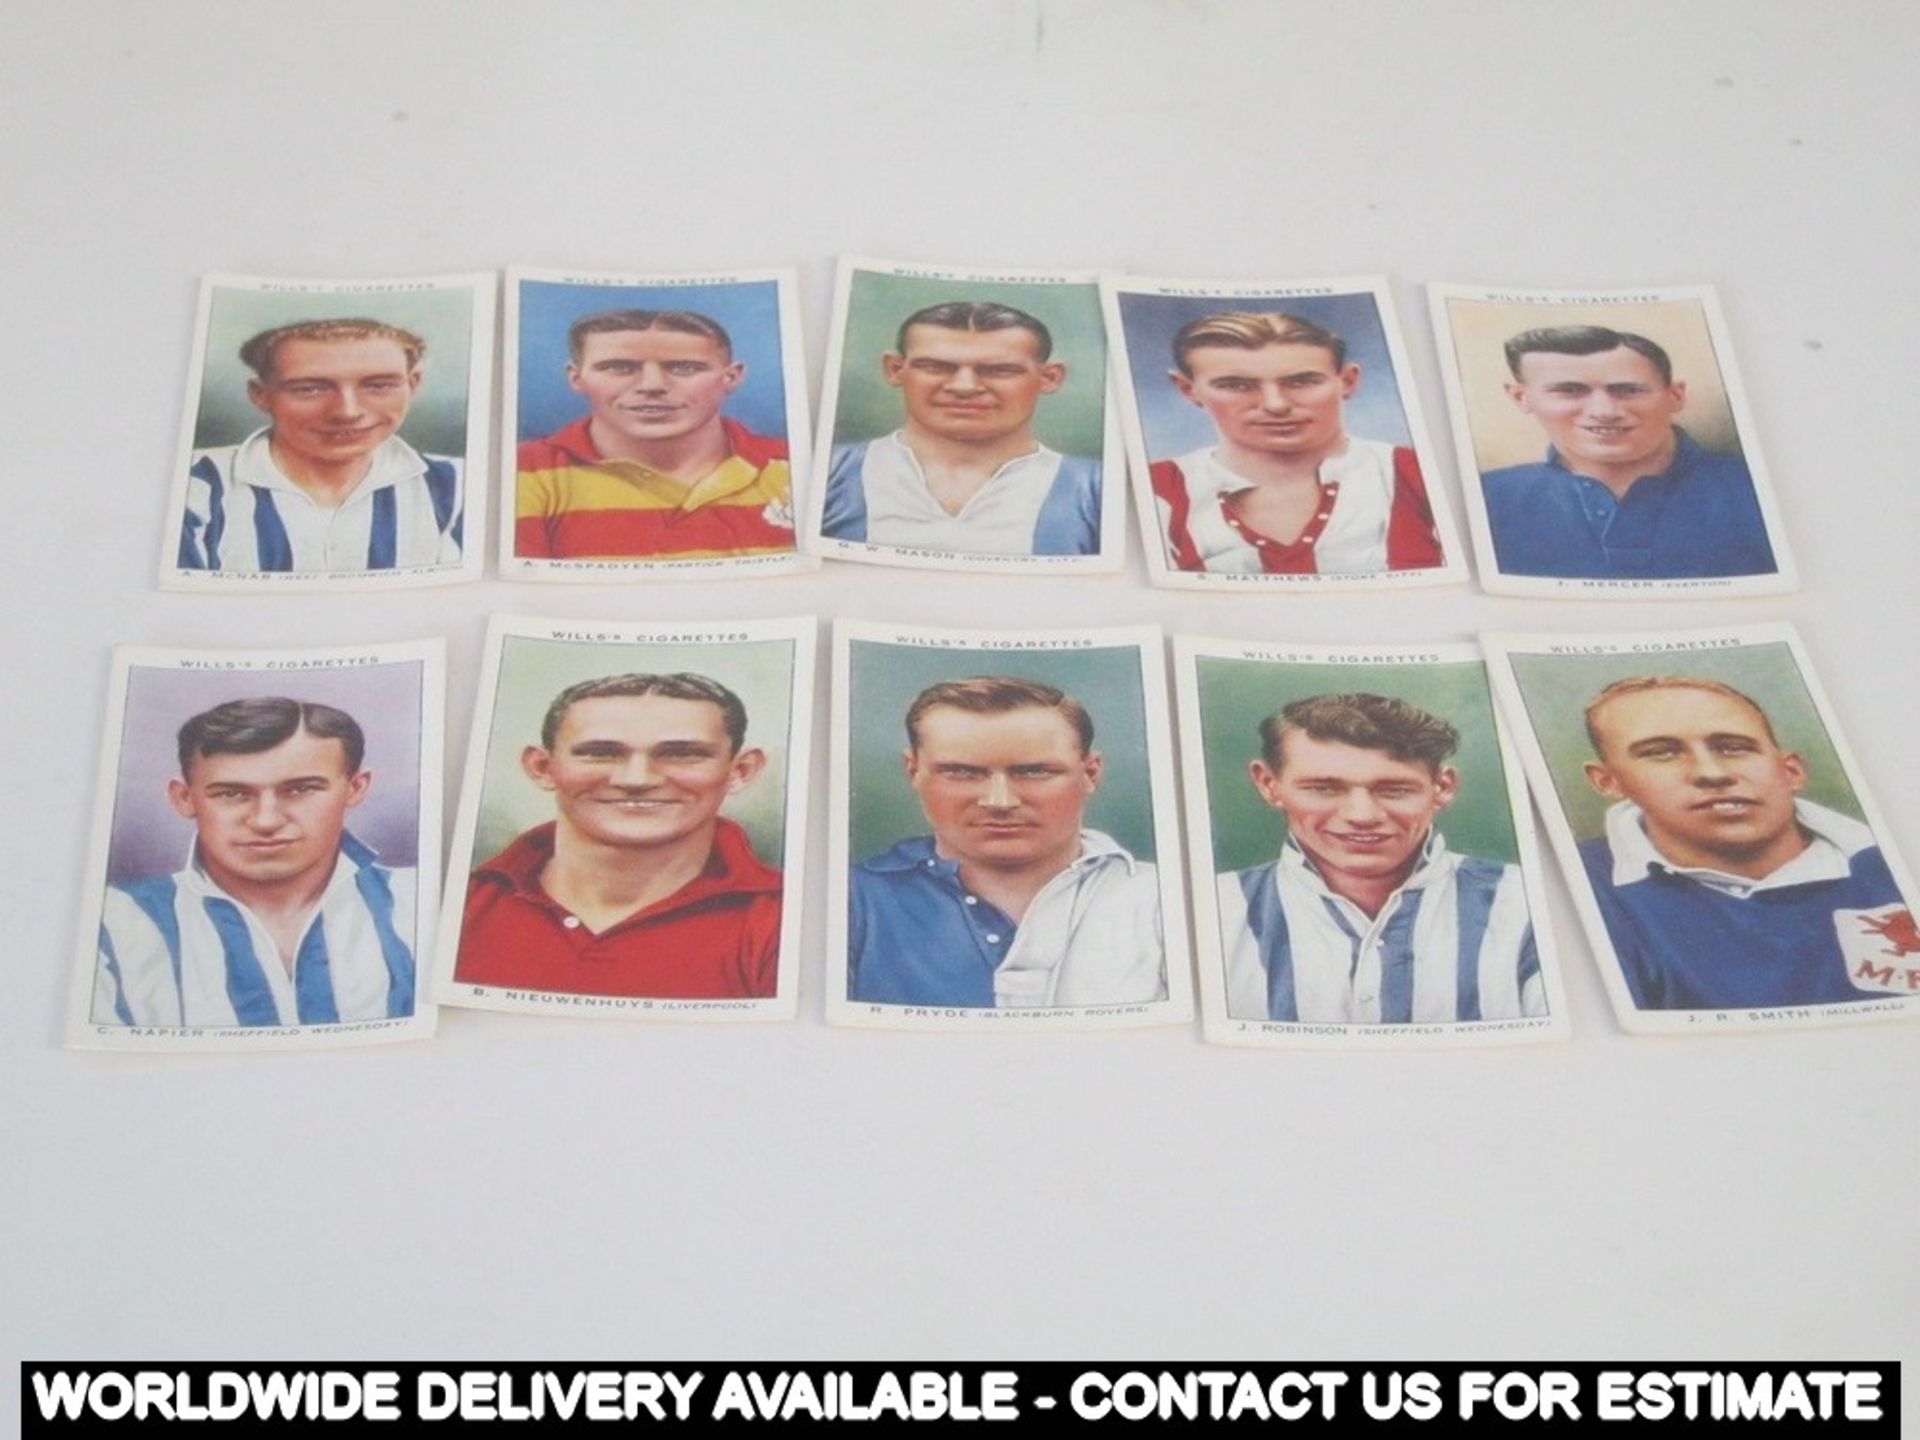 Box of 50 cigarette cards - Wild Woodbines - W D & H O Wills - Association Footballers - Image 7 of 9